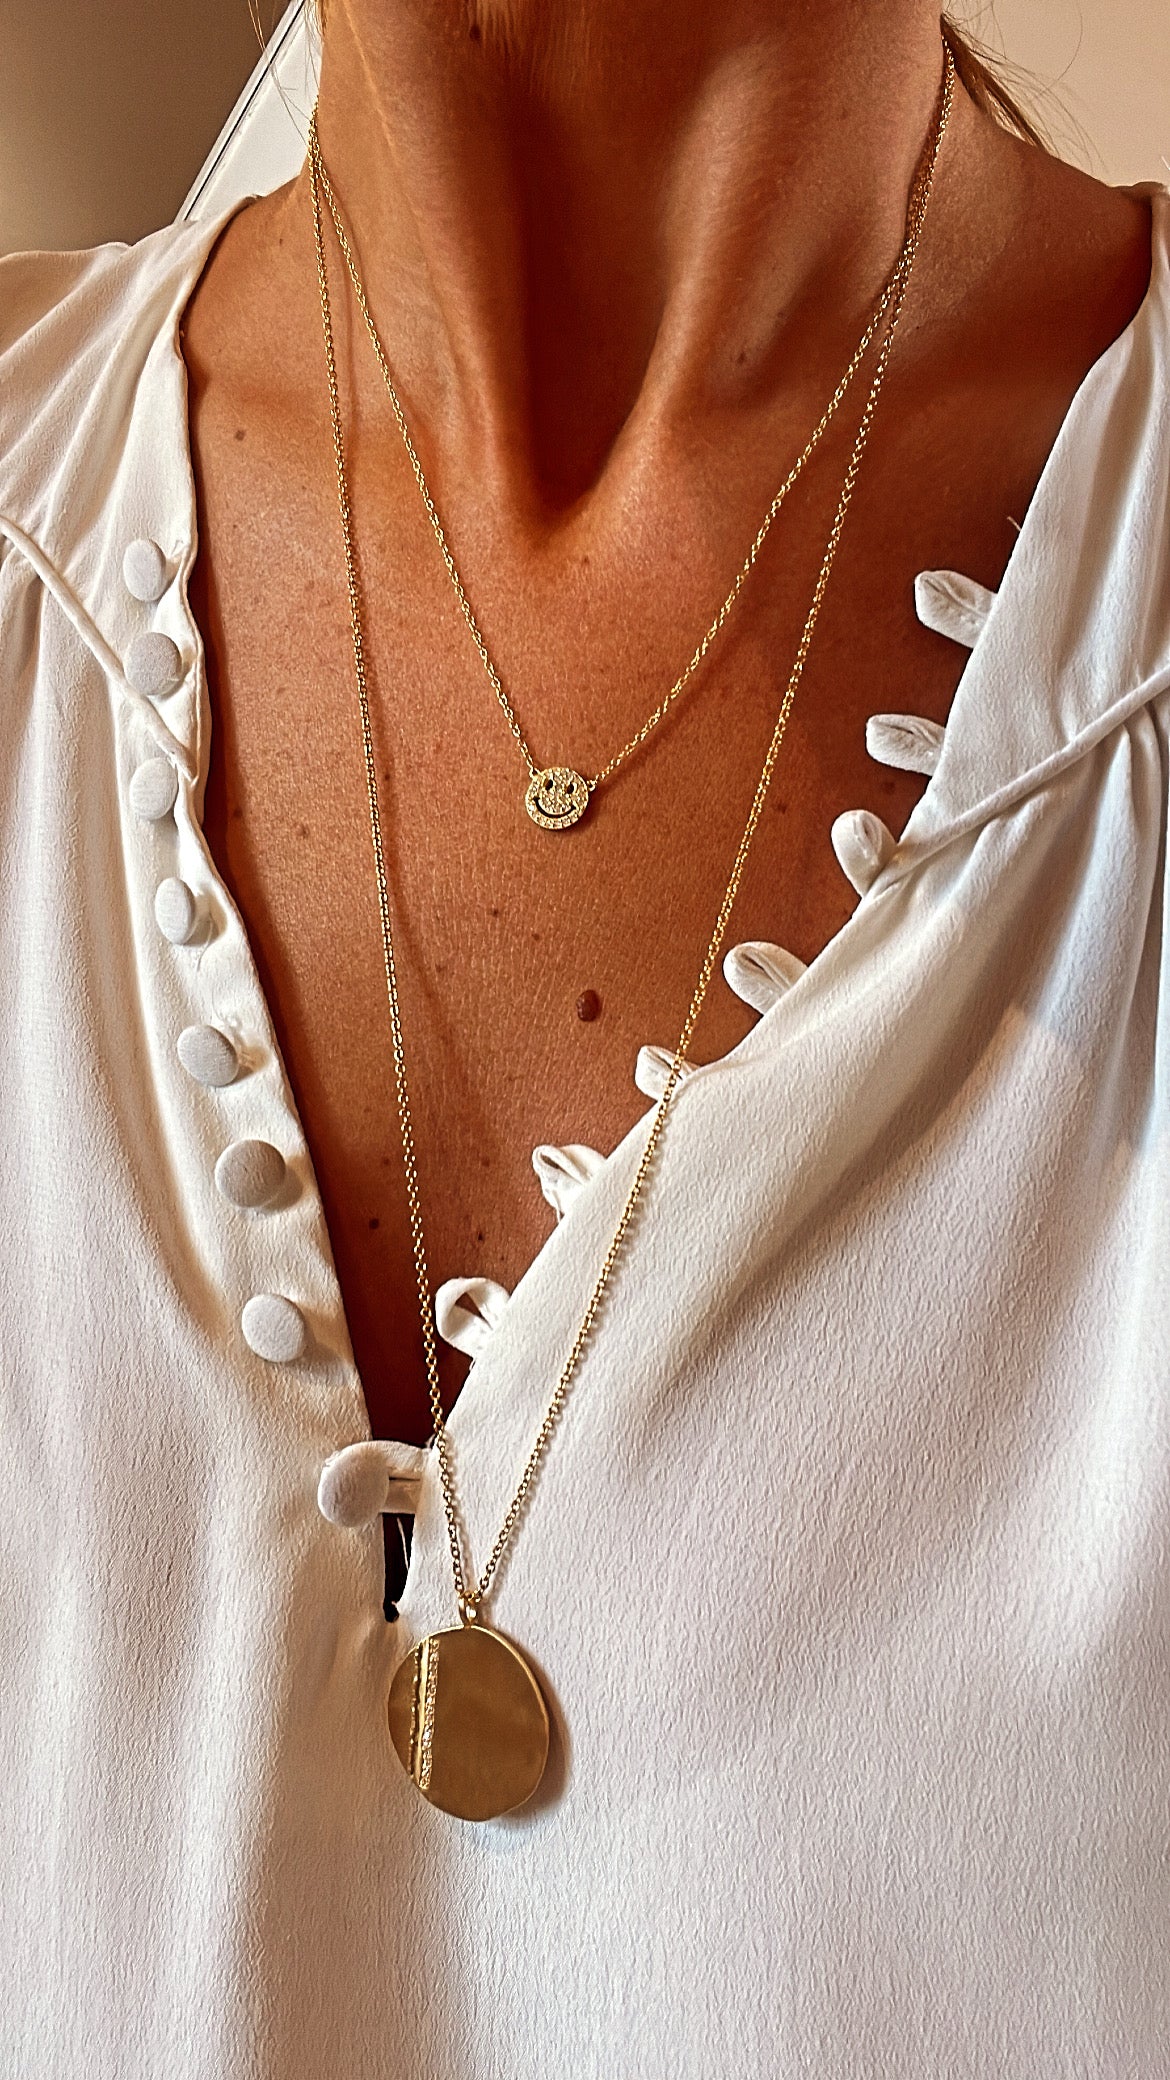 smiley necklace long janis necklace layering necklaces louise hendricks janis necklace in white